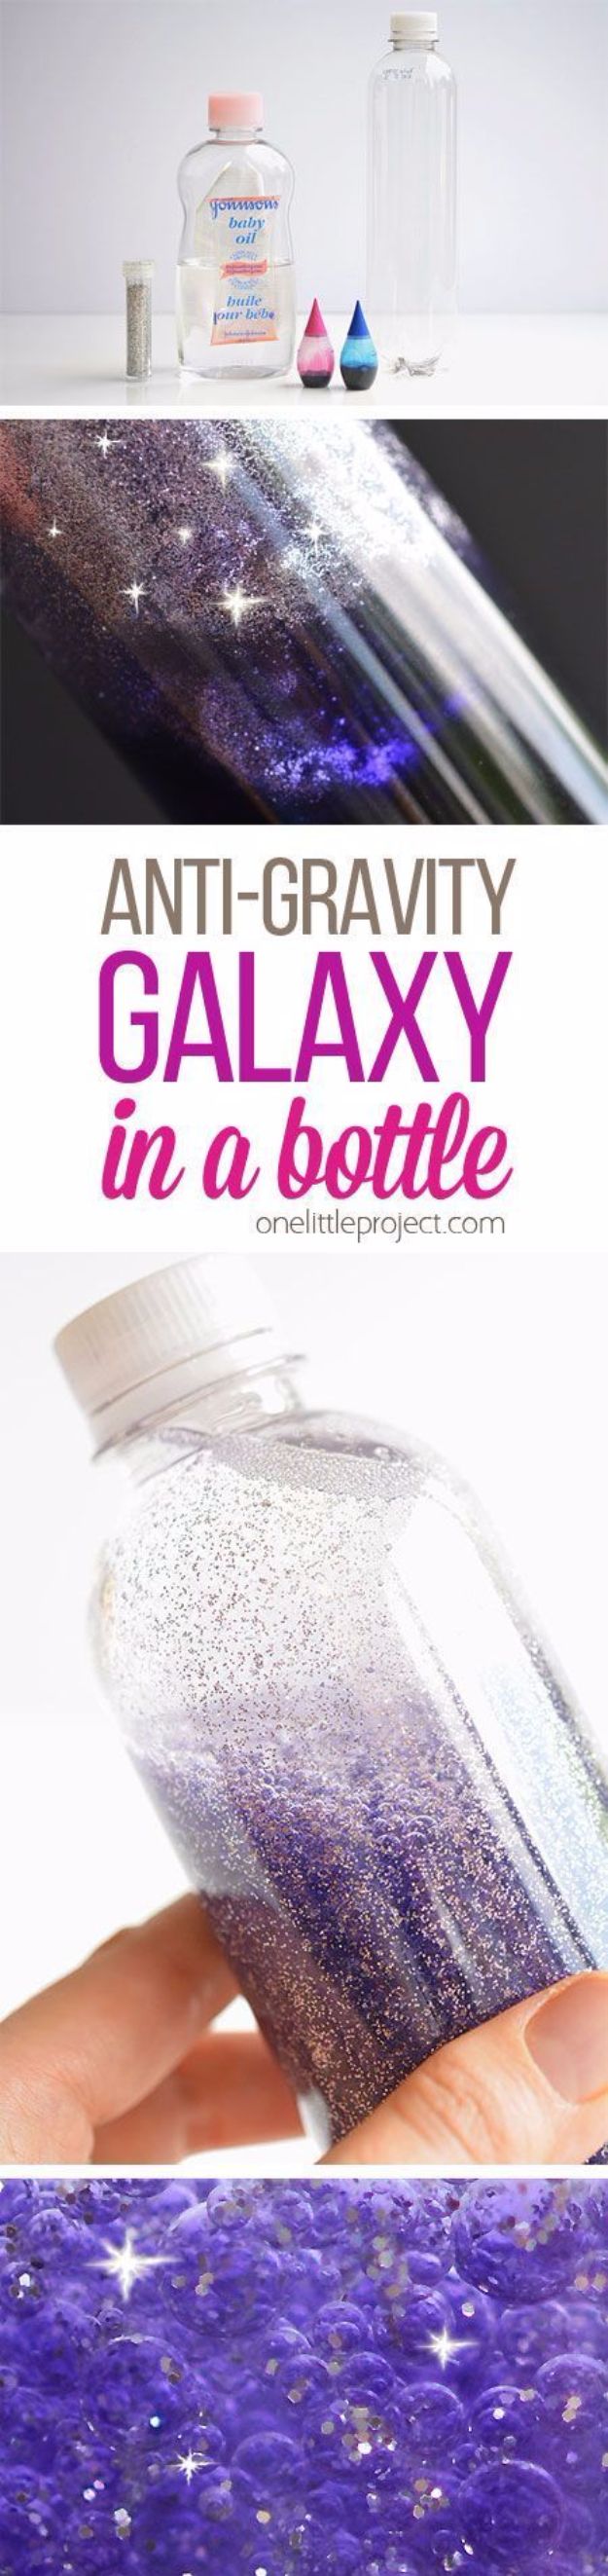 Galaxy DIY Crafts - Anti-Gravity Galaxy in a Bottle - Easy Room Decor, Cool Clothes, Fun Fabric Ideas and Painting Projects - Food, Cookies and Cupcake Recipes - Nebula Galaxy In A Jar - Art for Your Bedroom - Shirt, Backpack, Soap, Decorations for Teens, Kids and Adults